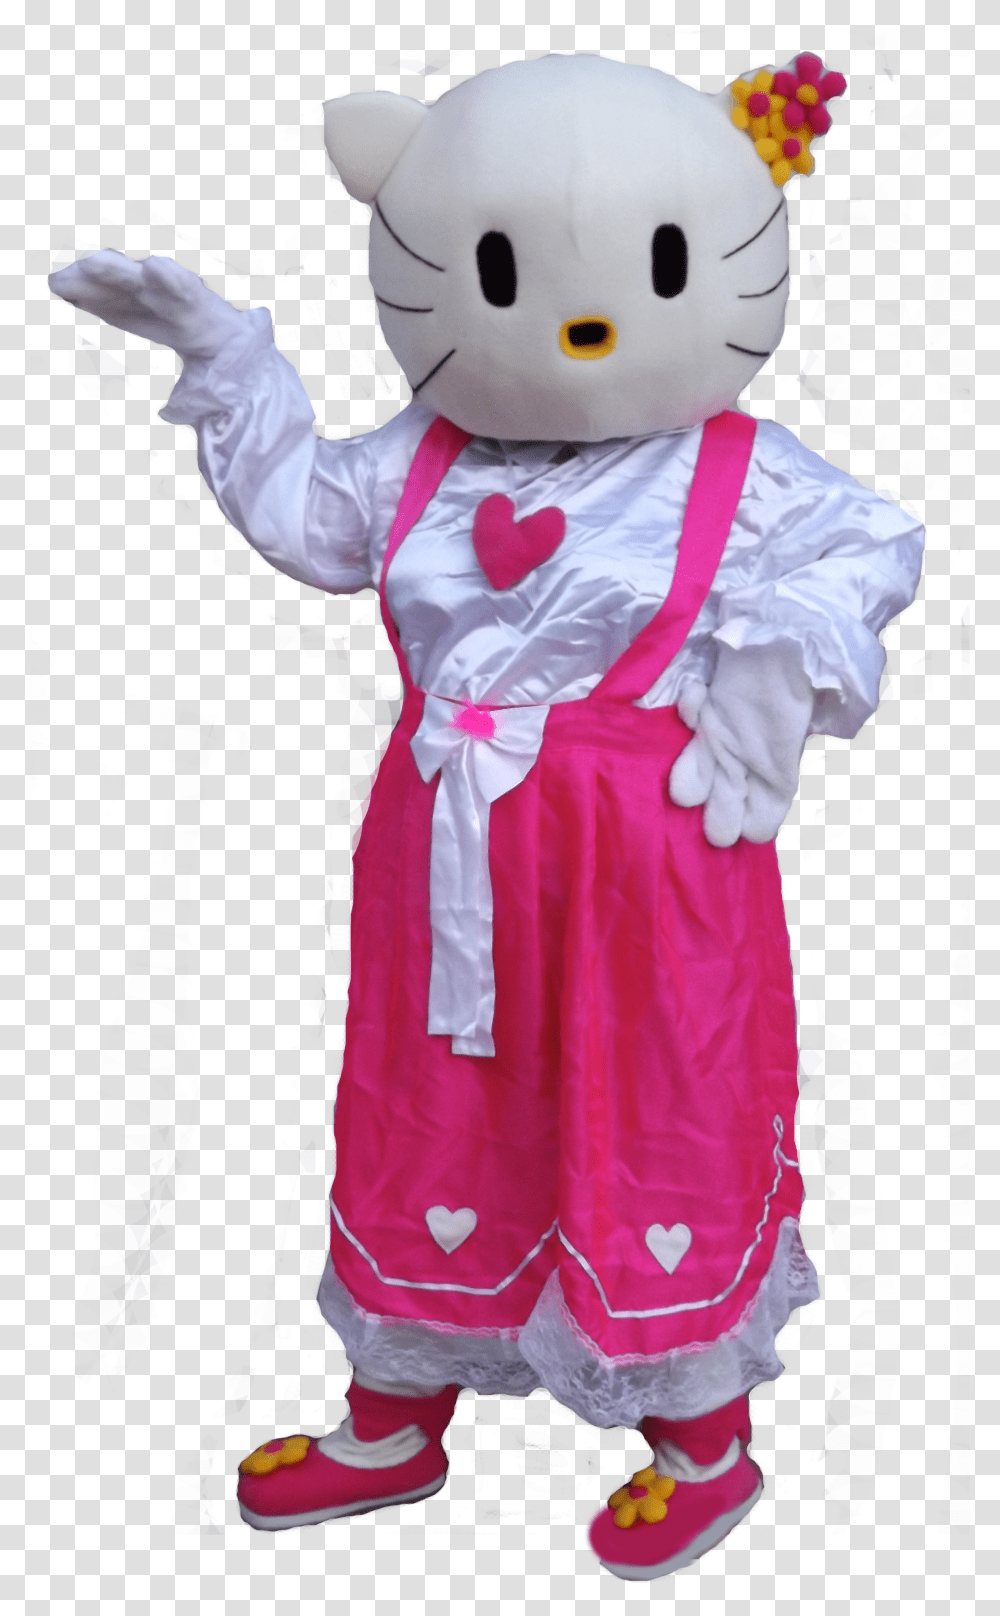 Have Superman Or Dora The Explorer Show Up To Your Hello Kitty Mascot Transparent Png